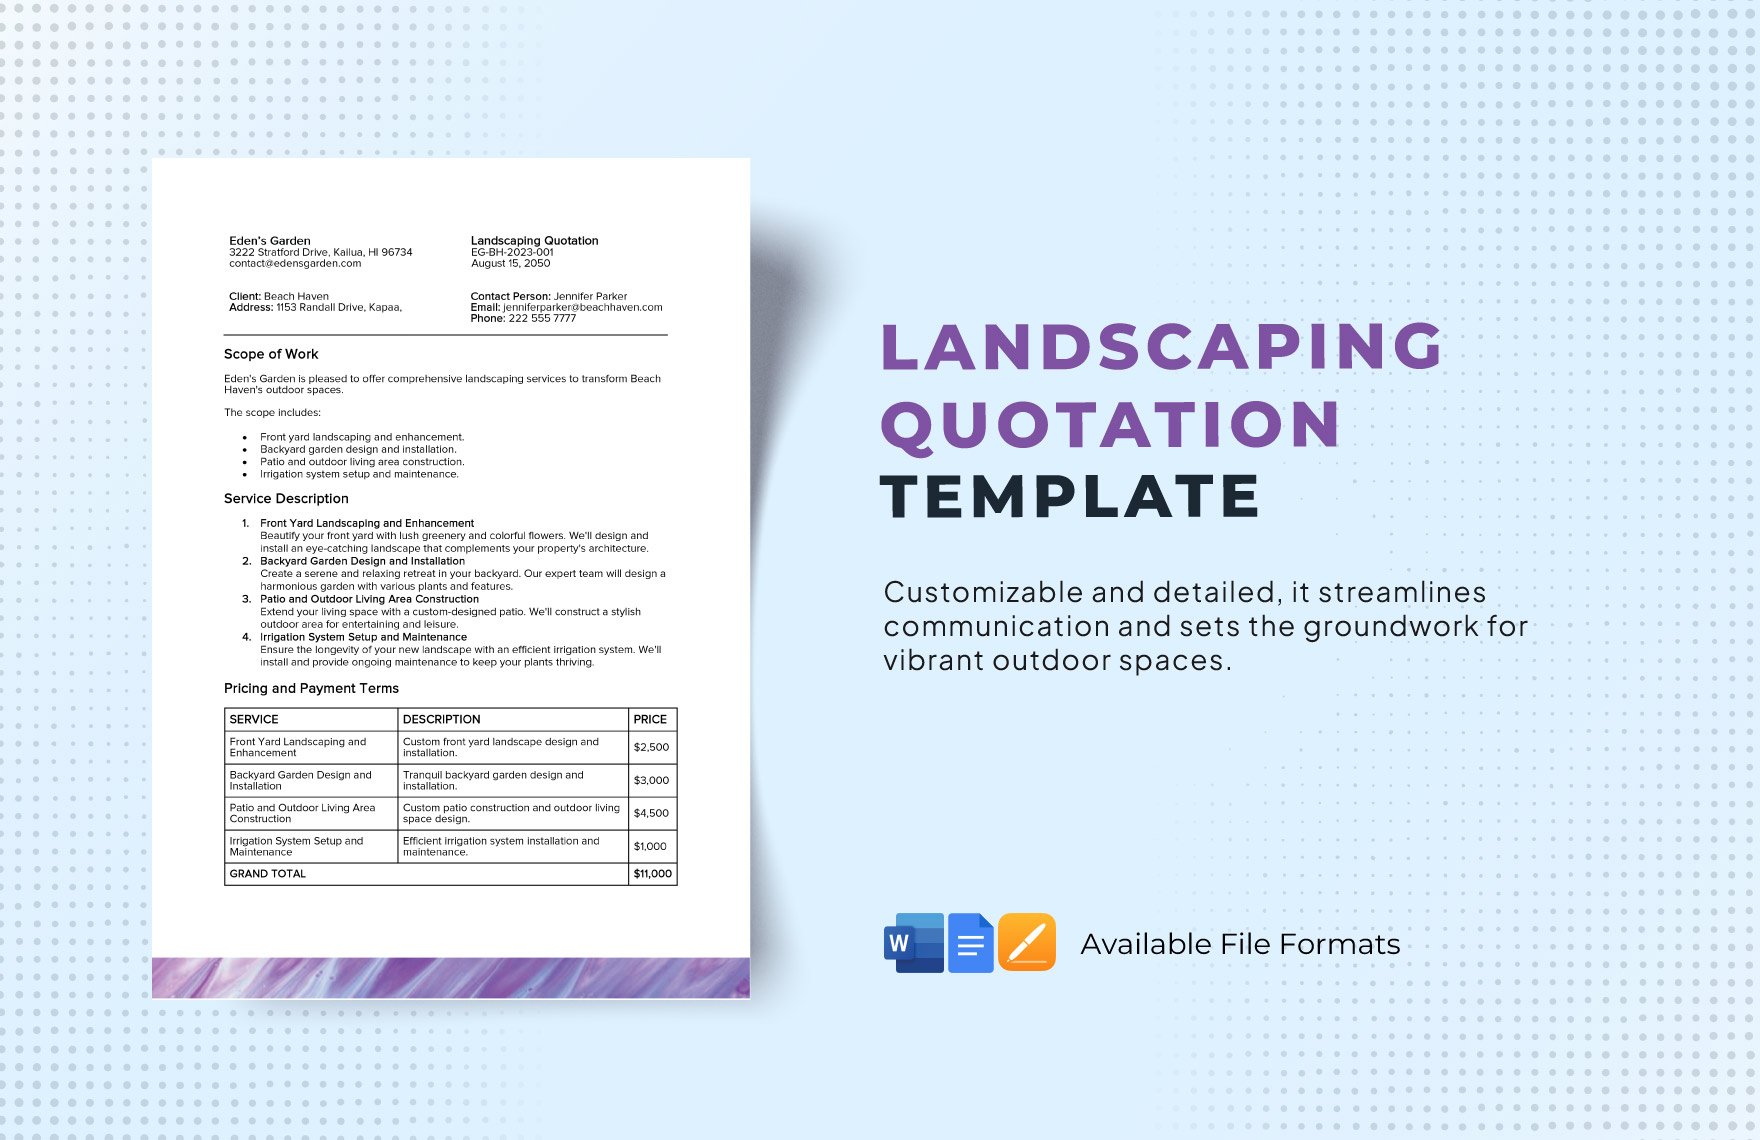 Landscaping Quotation Template